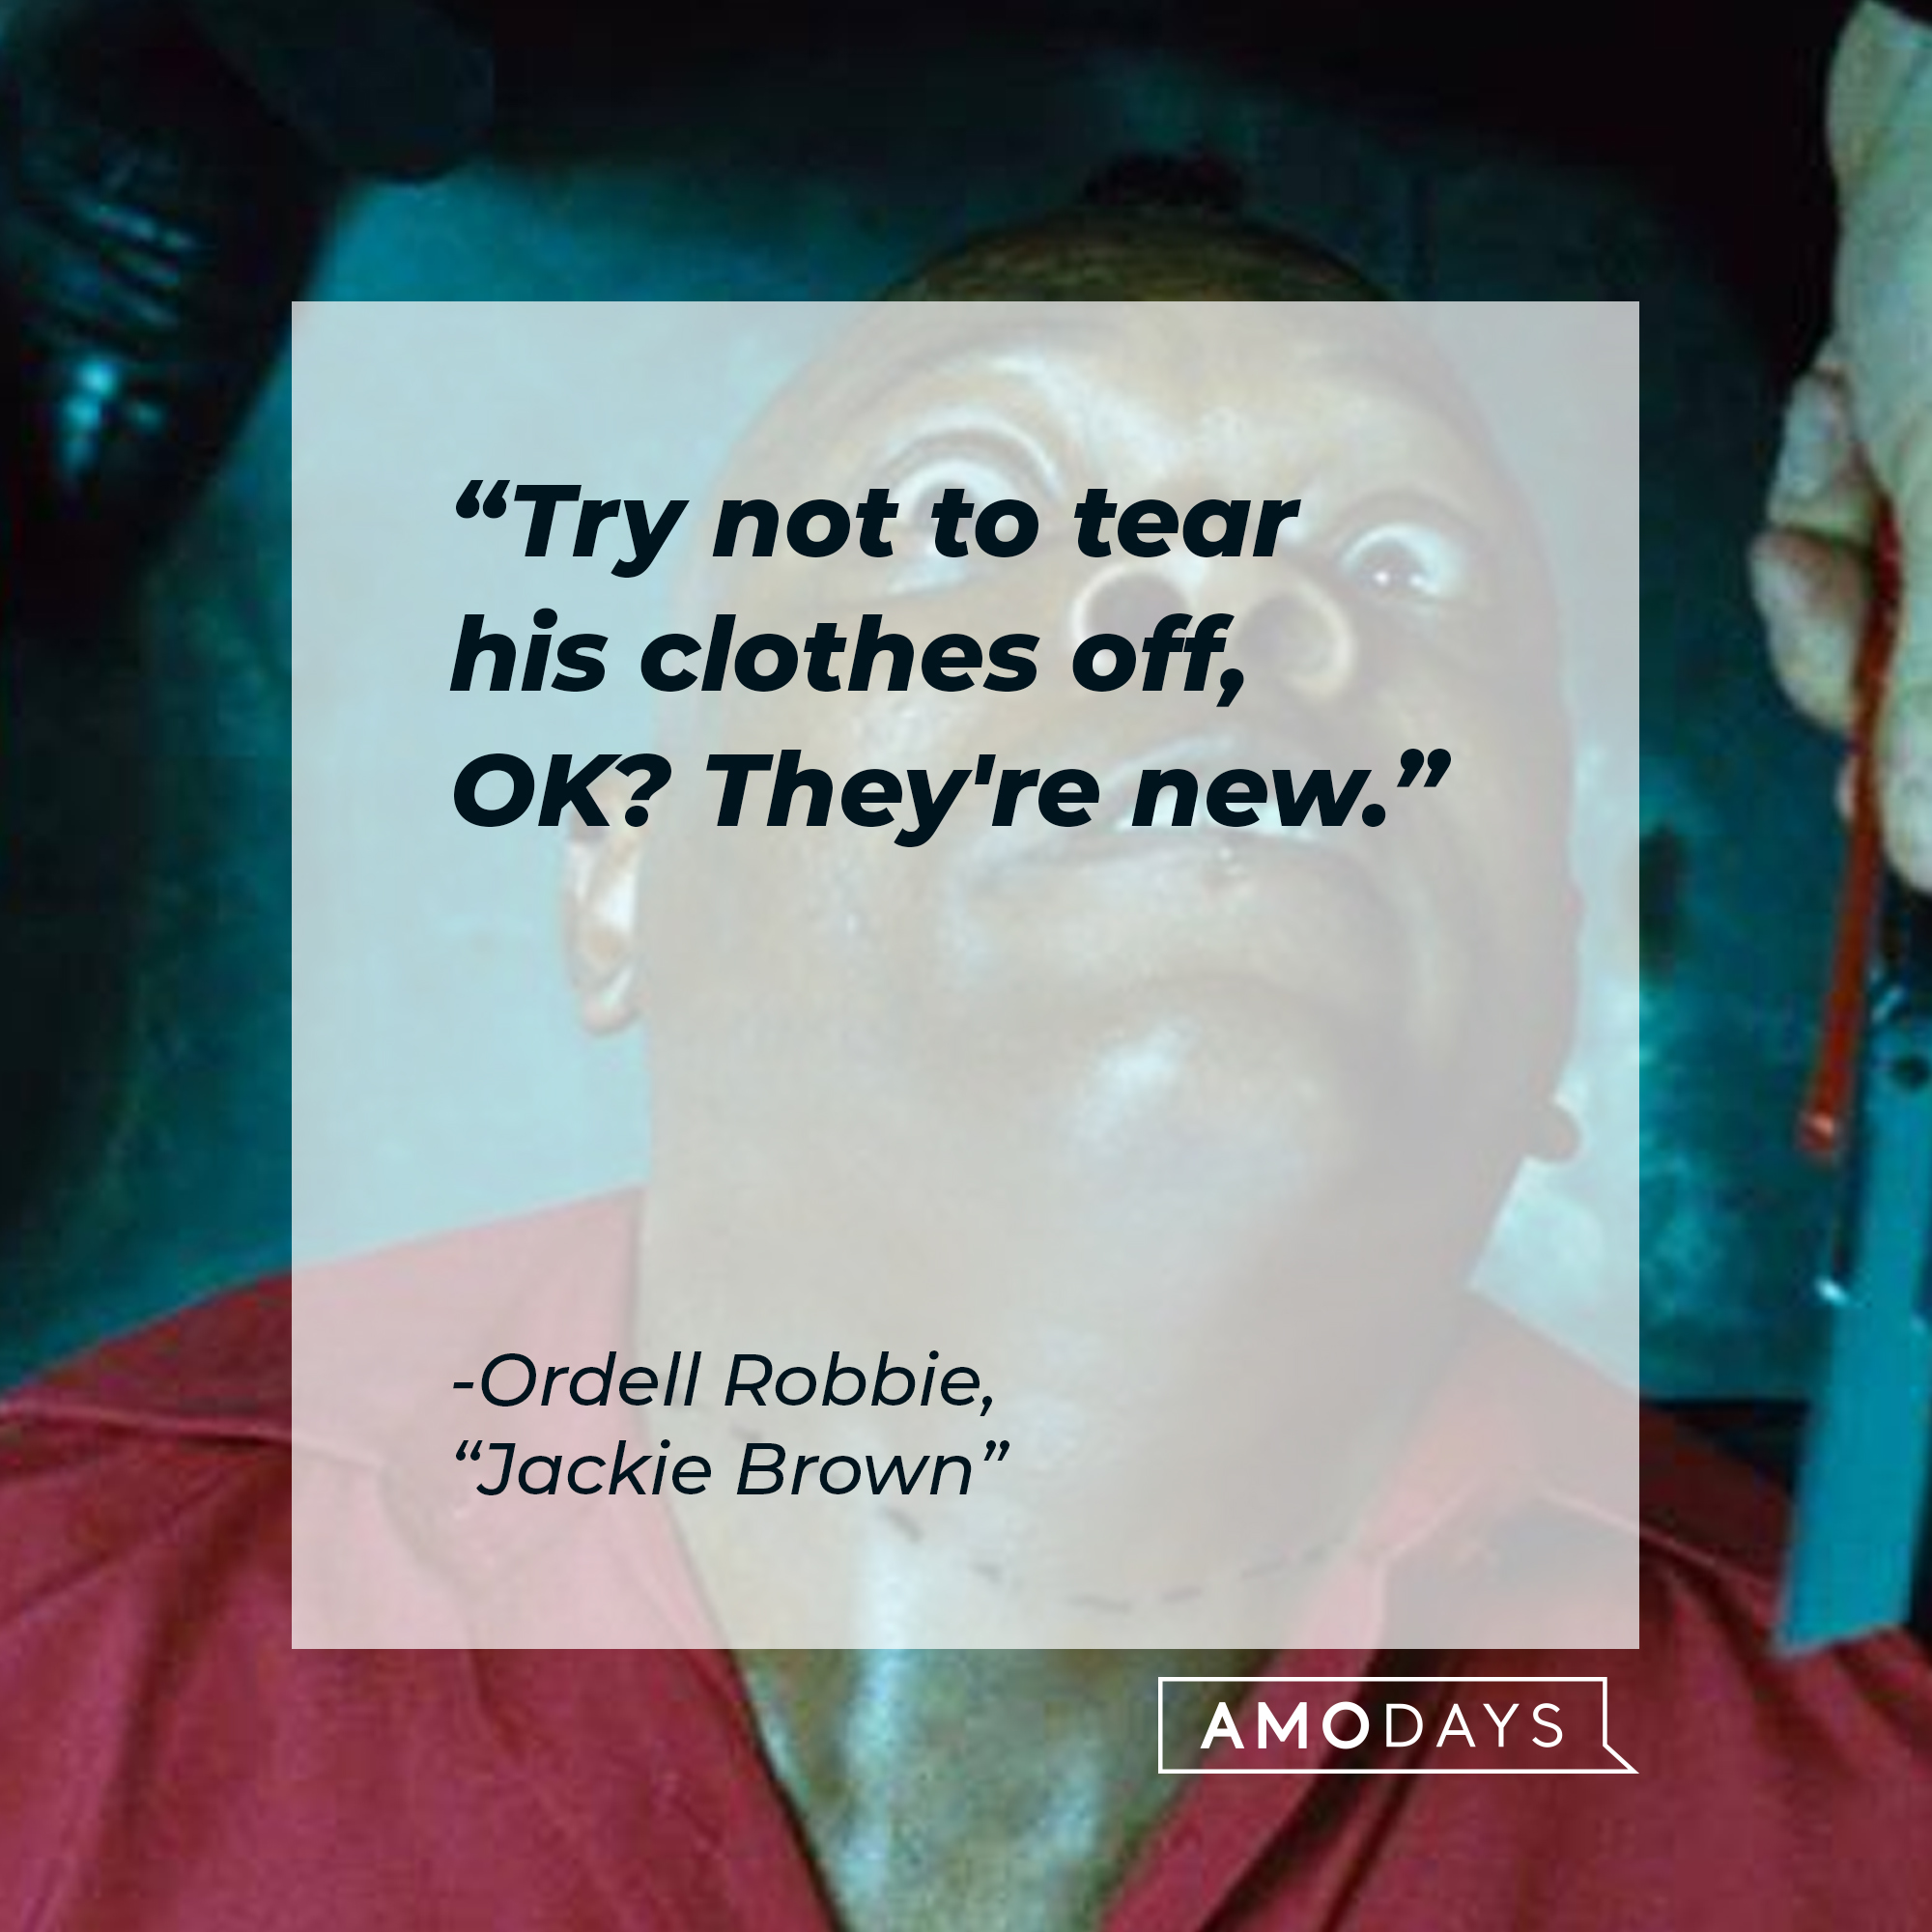 Ordell Robbie's quote: "Try not to tear his clothes off, OK? They're new." | Source: Facebook/JackieBrownMovie